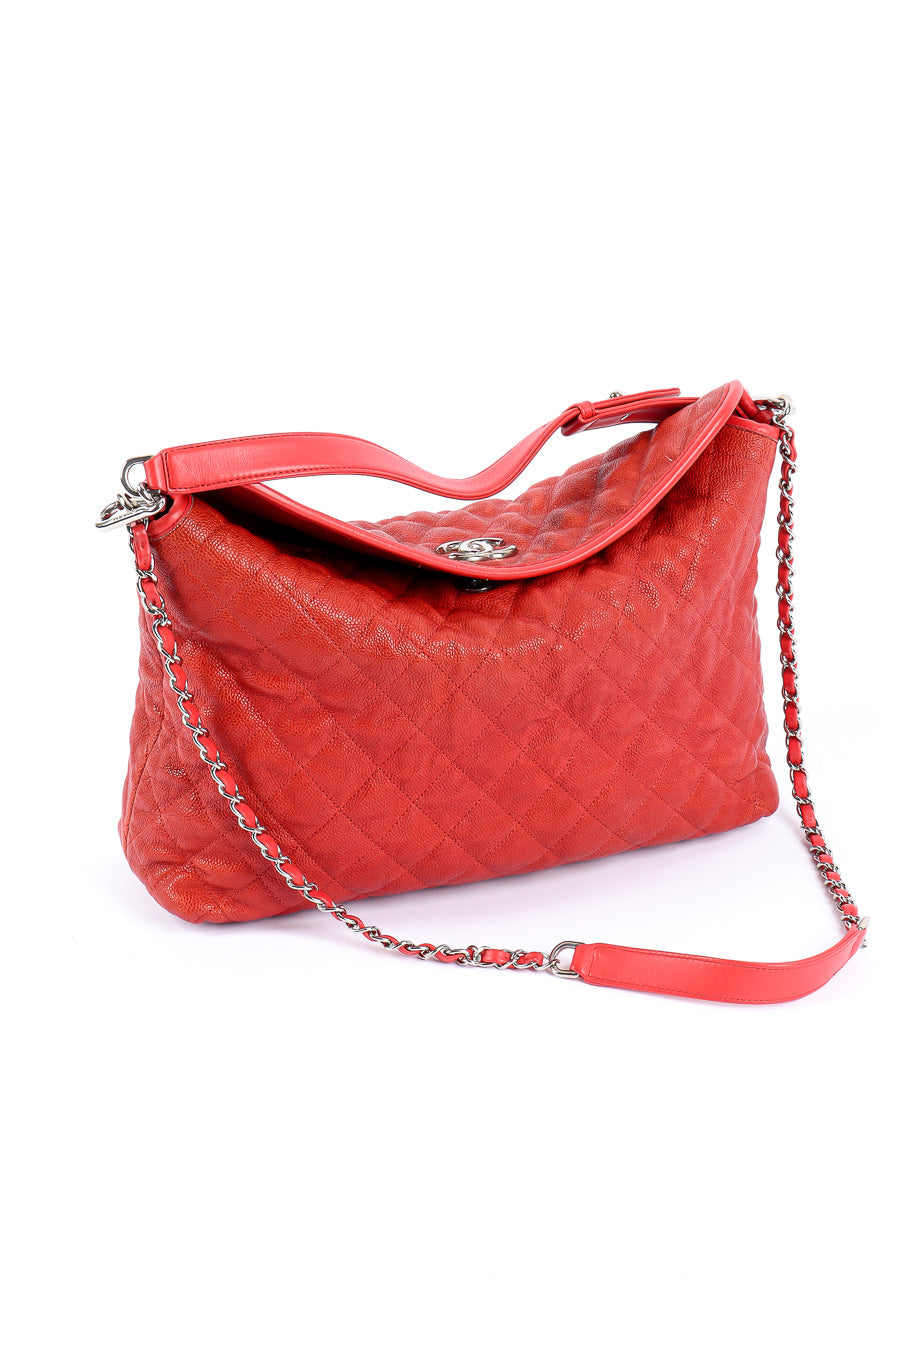 Chanel french riviera quilted hobo bag product shot @recessla